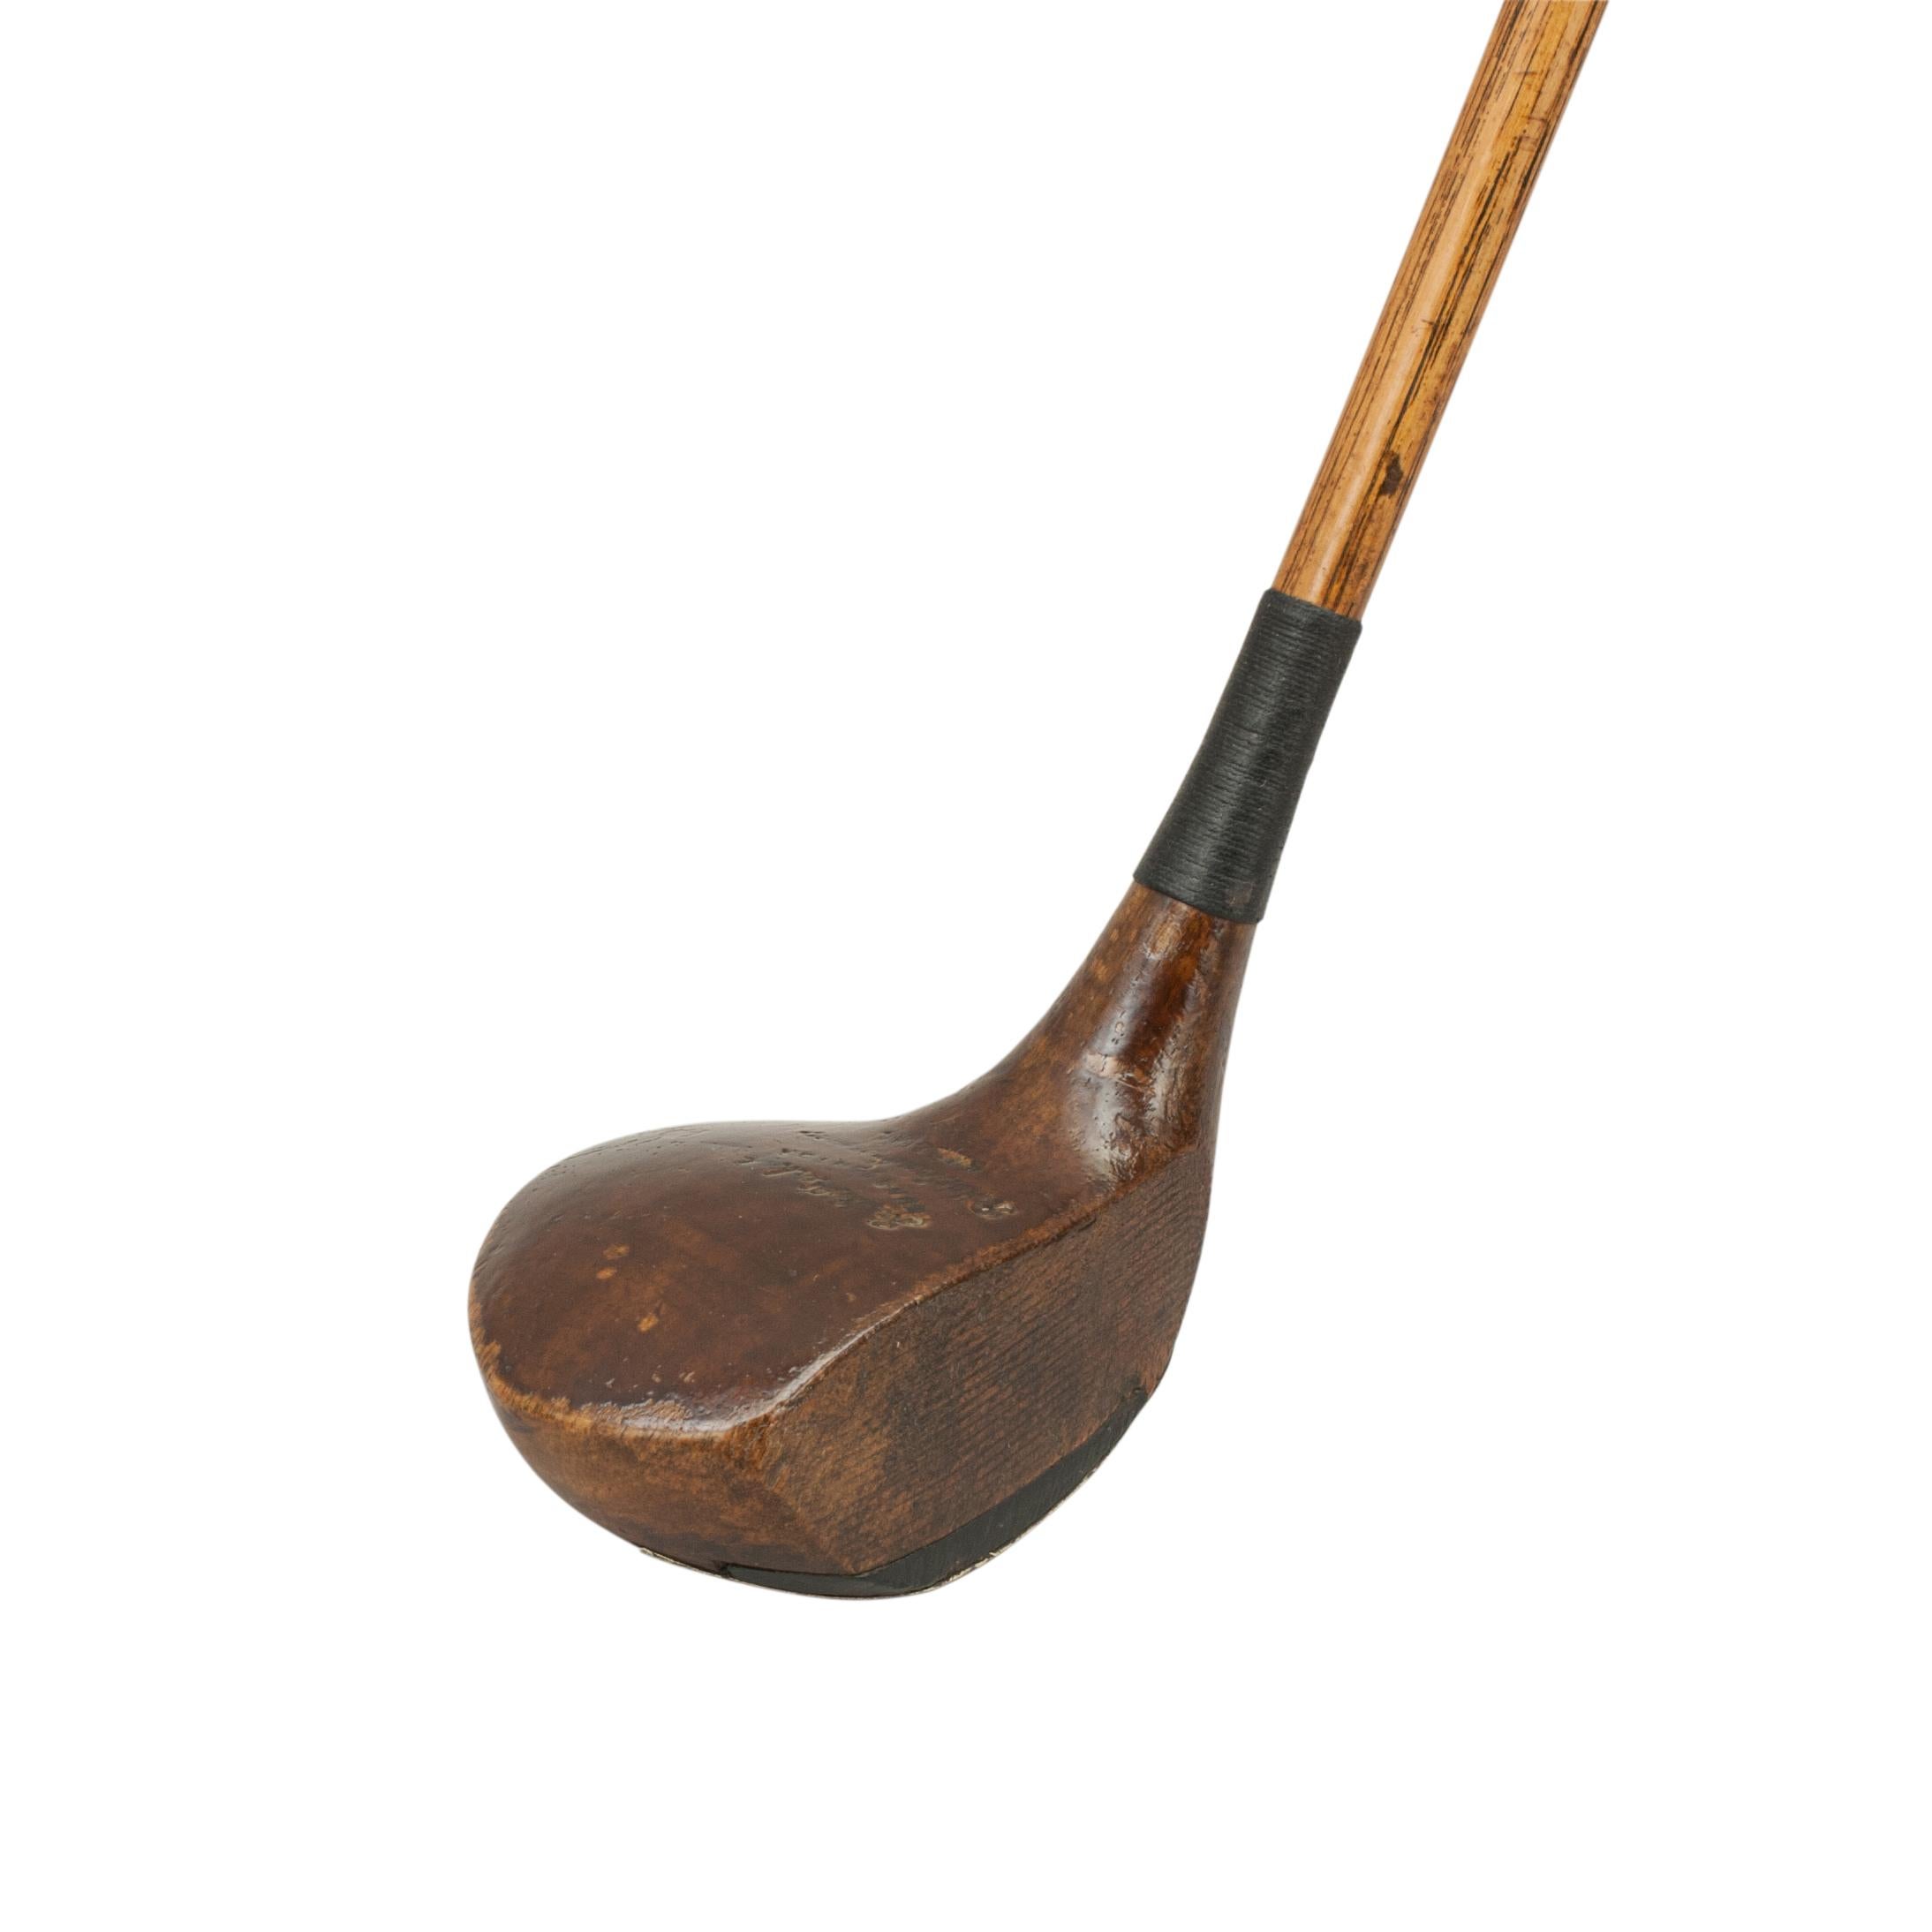 Hickory shafted socket head golf club, brassie, spoon
This persimmon wood brassie is a great playable golf club with a hickory shaft and polished leather grip. The head is marked with the golf pro's details but it is hard to decipher. The club head